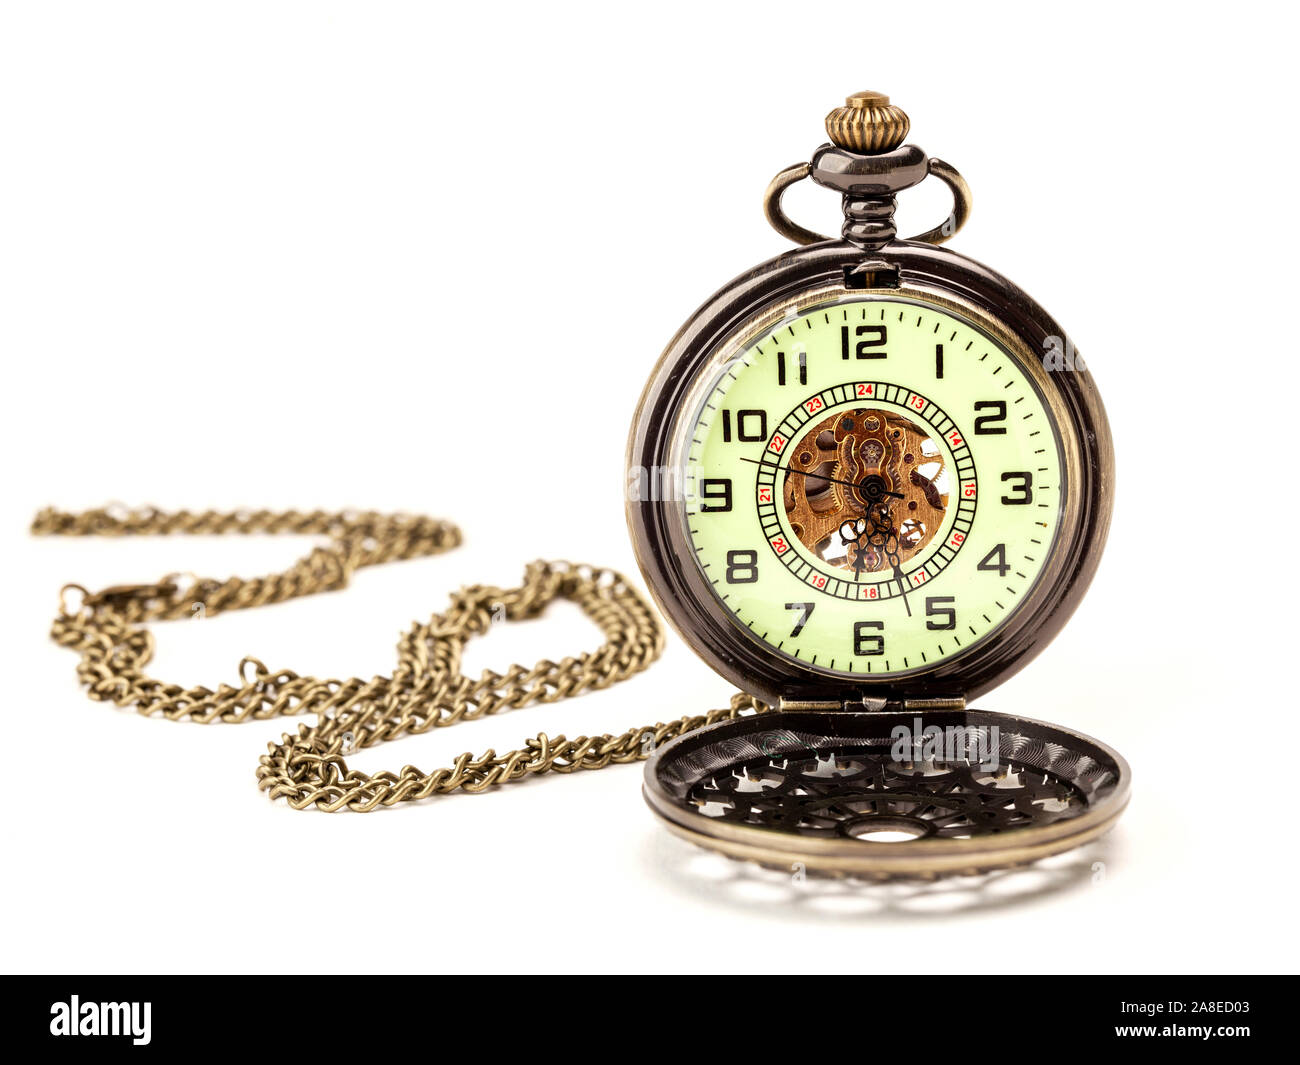 Modern ornate pocket watch and chain. Stock Photo